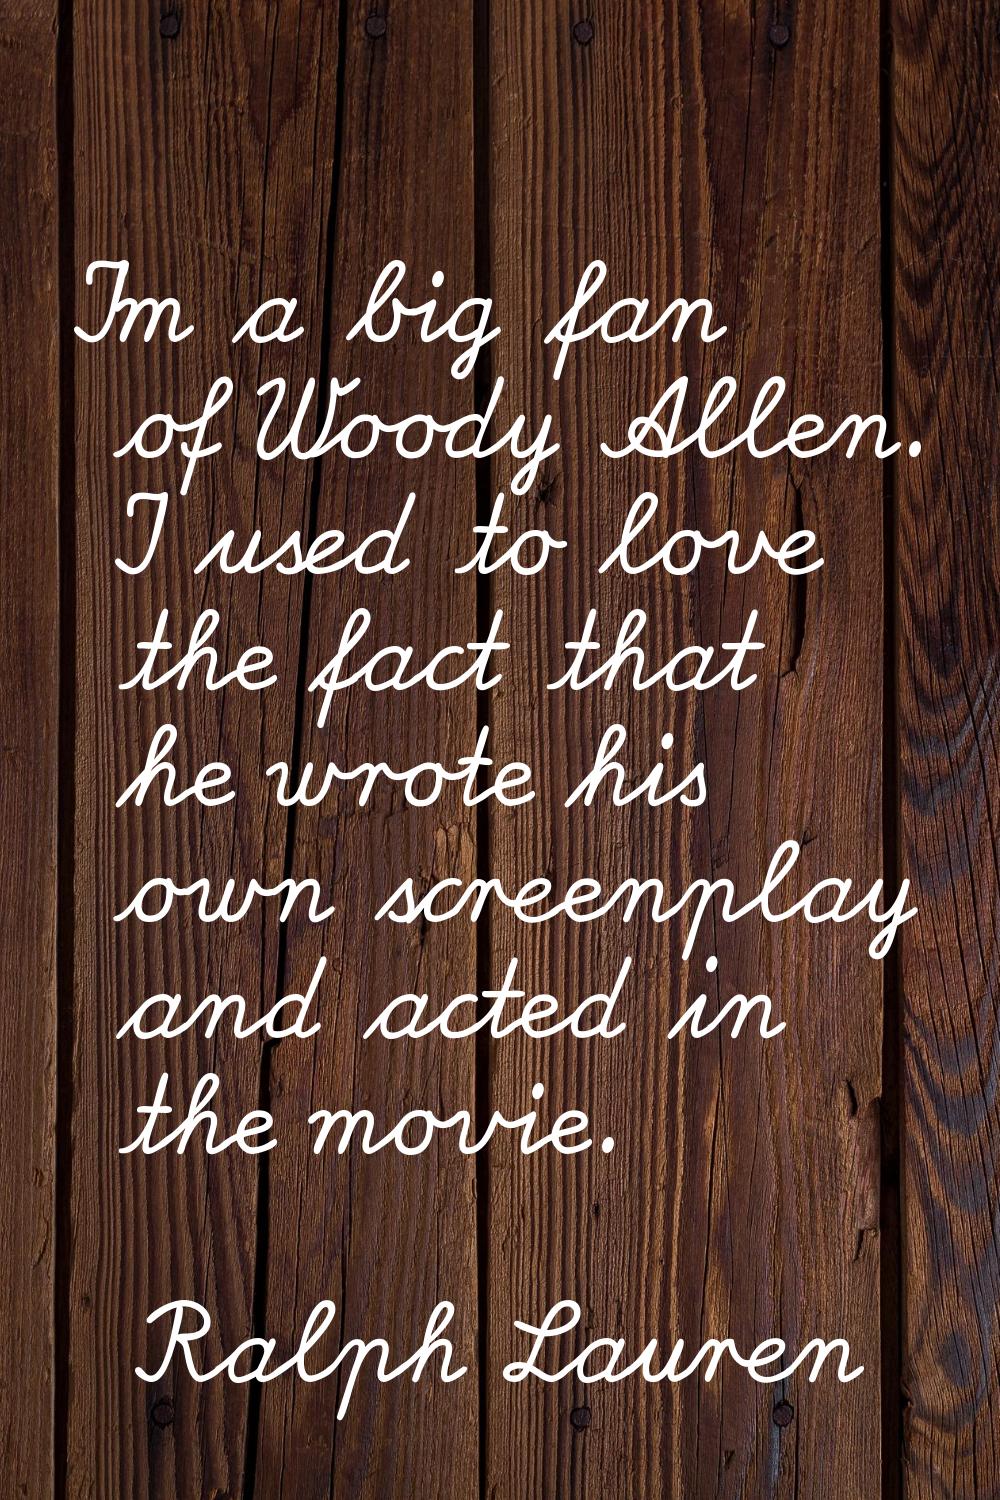 I'm a big fan of Woody Allen. I used to love the fact that he wrote his own screenplay and acted in